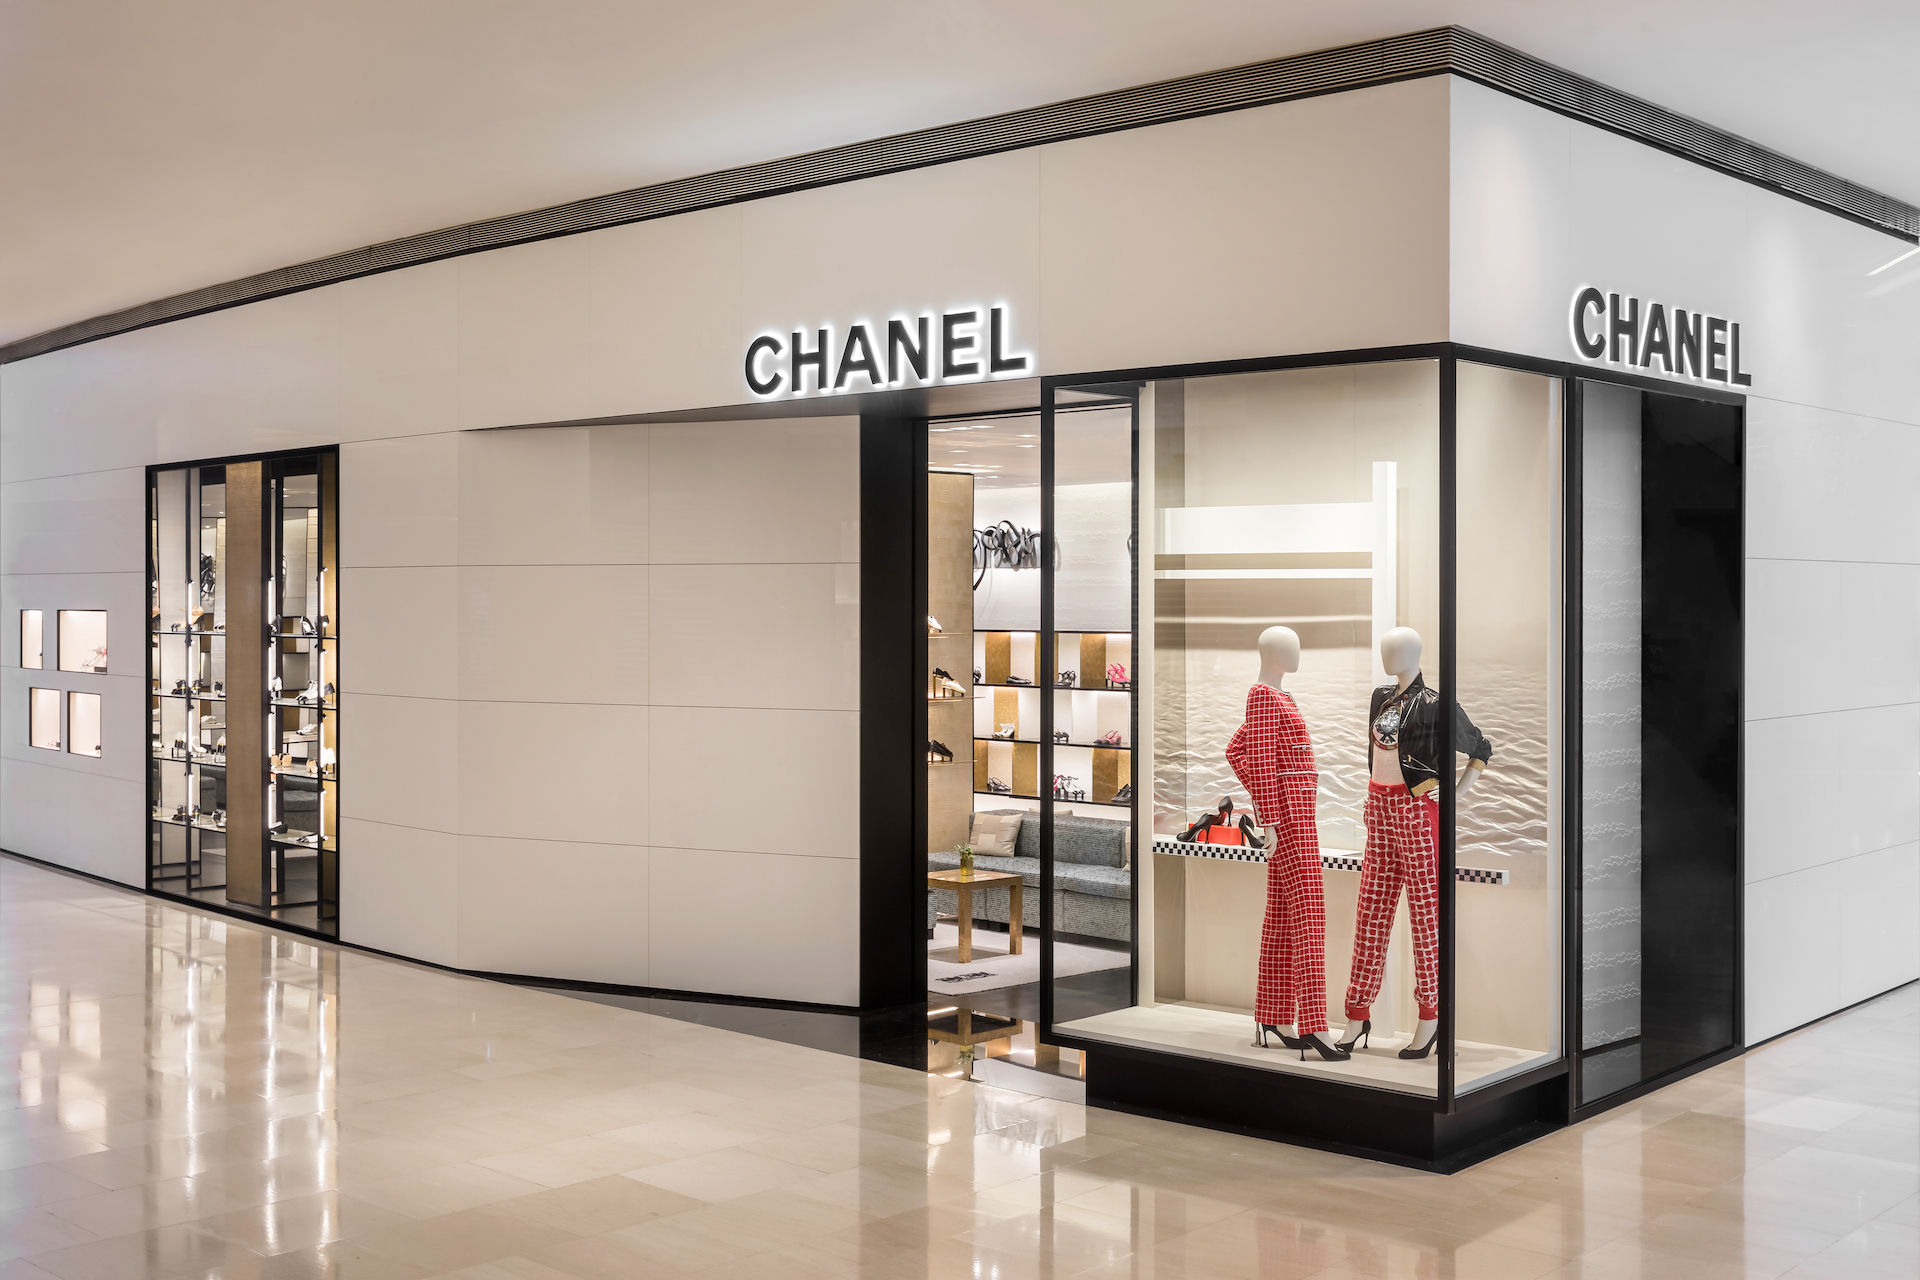 fyrværkeri dinosaurus Motherland Store Explore: Chanel welcomes you to new shoe store in Pavilion KL